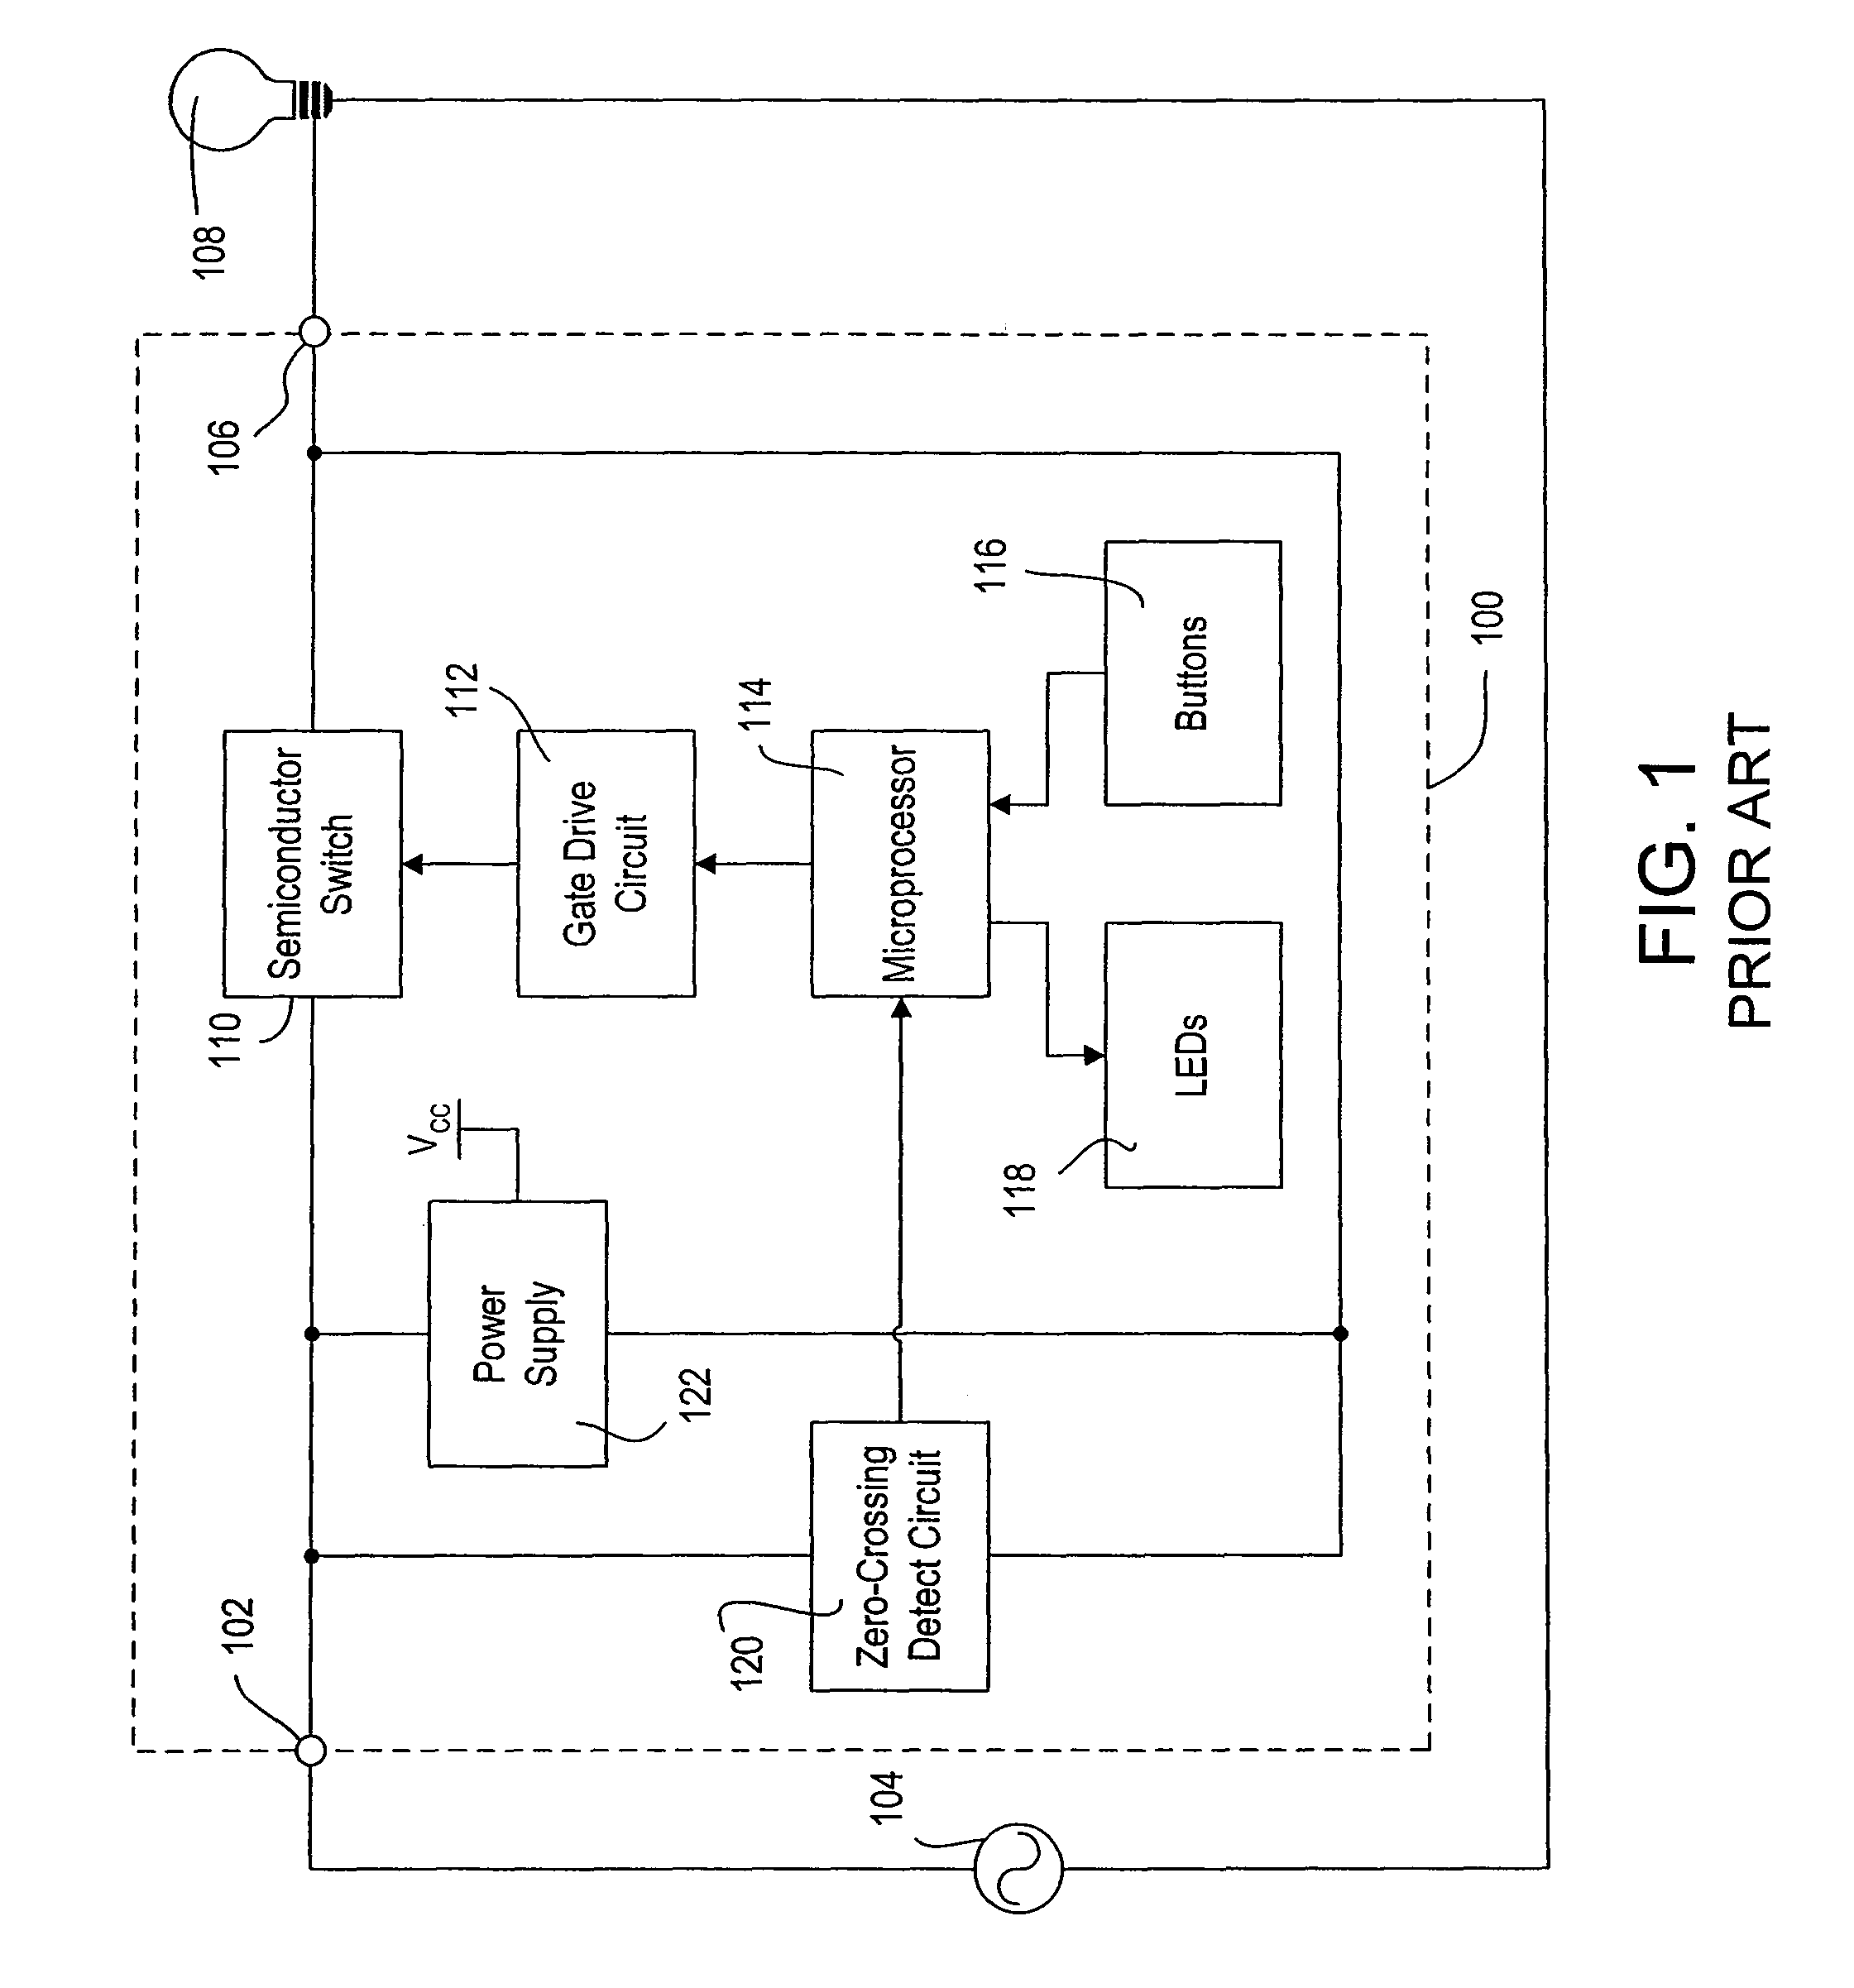 Load control device having a low-power mode